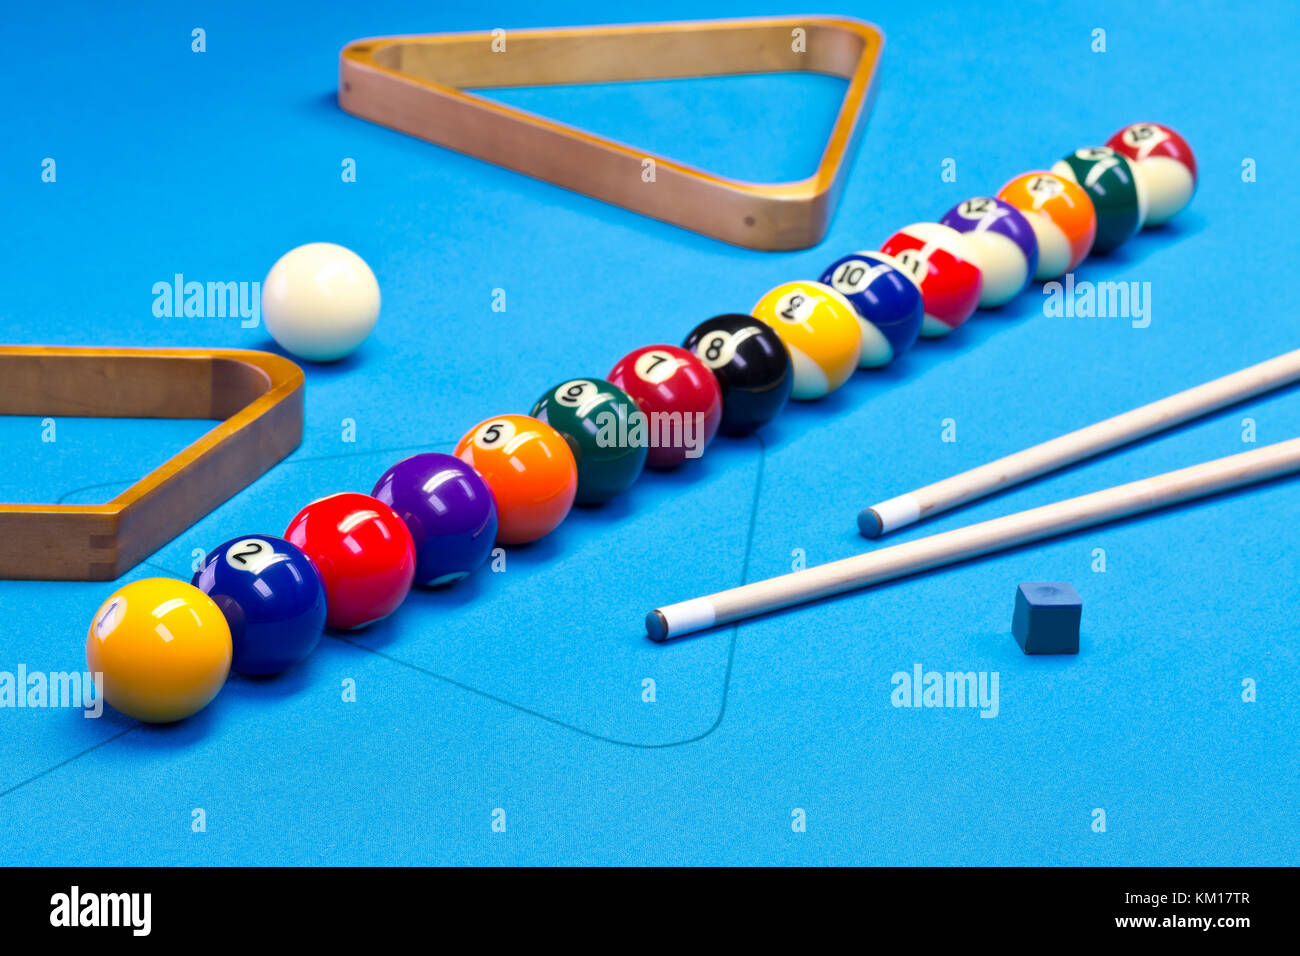 Billiard pool game balls lined up on billiard table with blue cloth with cues, racks, and chalk Stock Photo